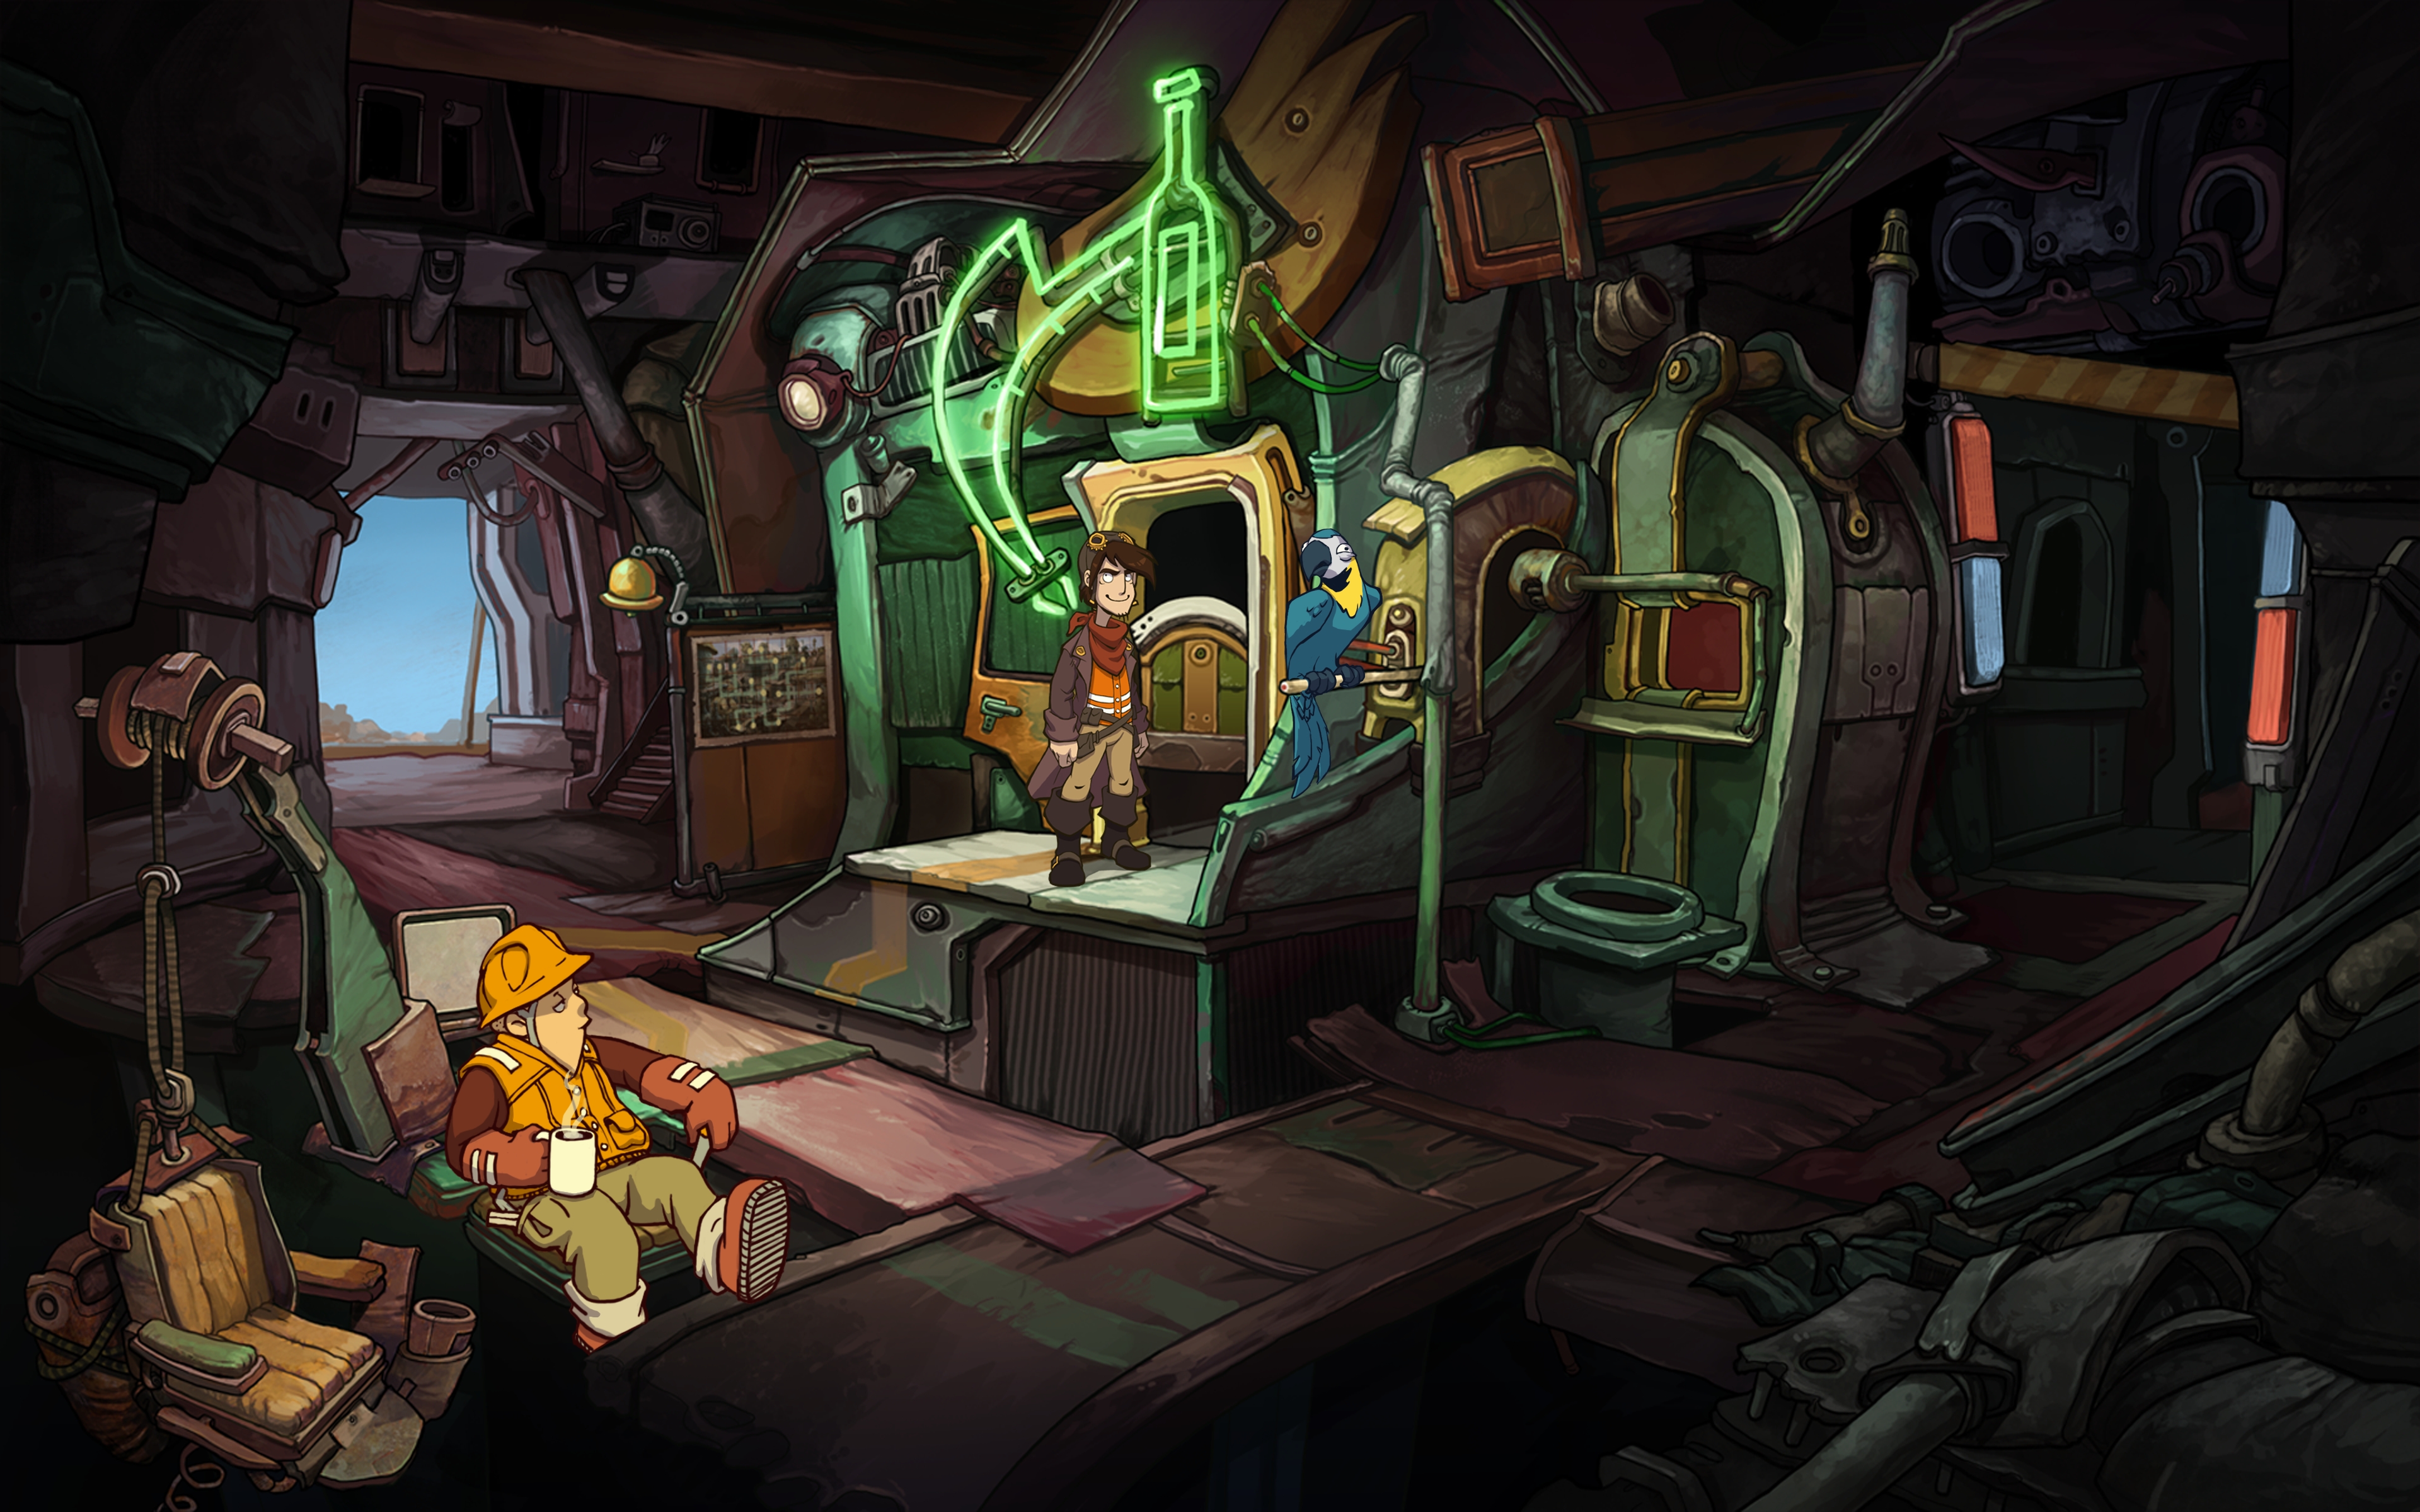 deponia clear water